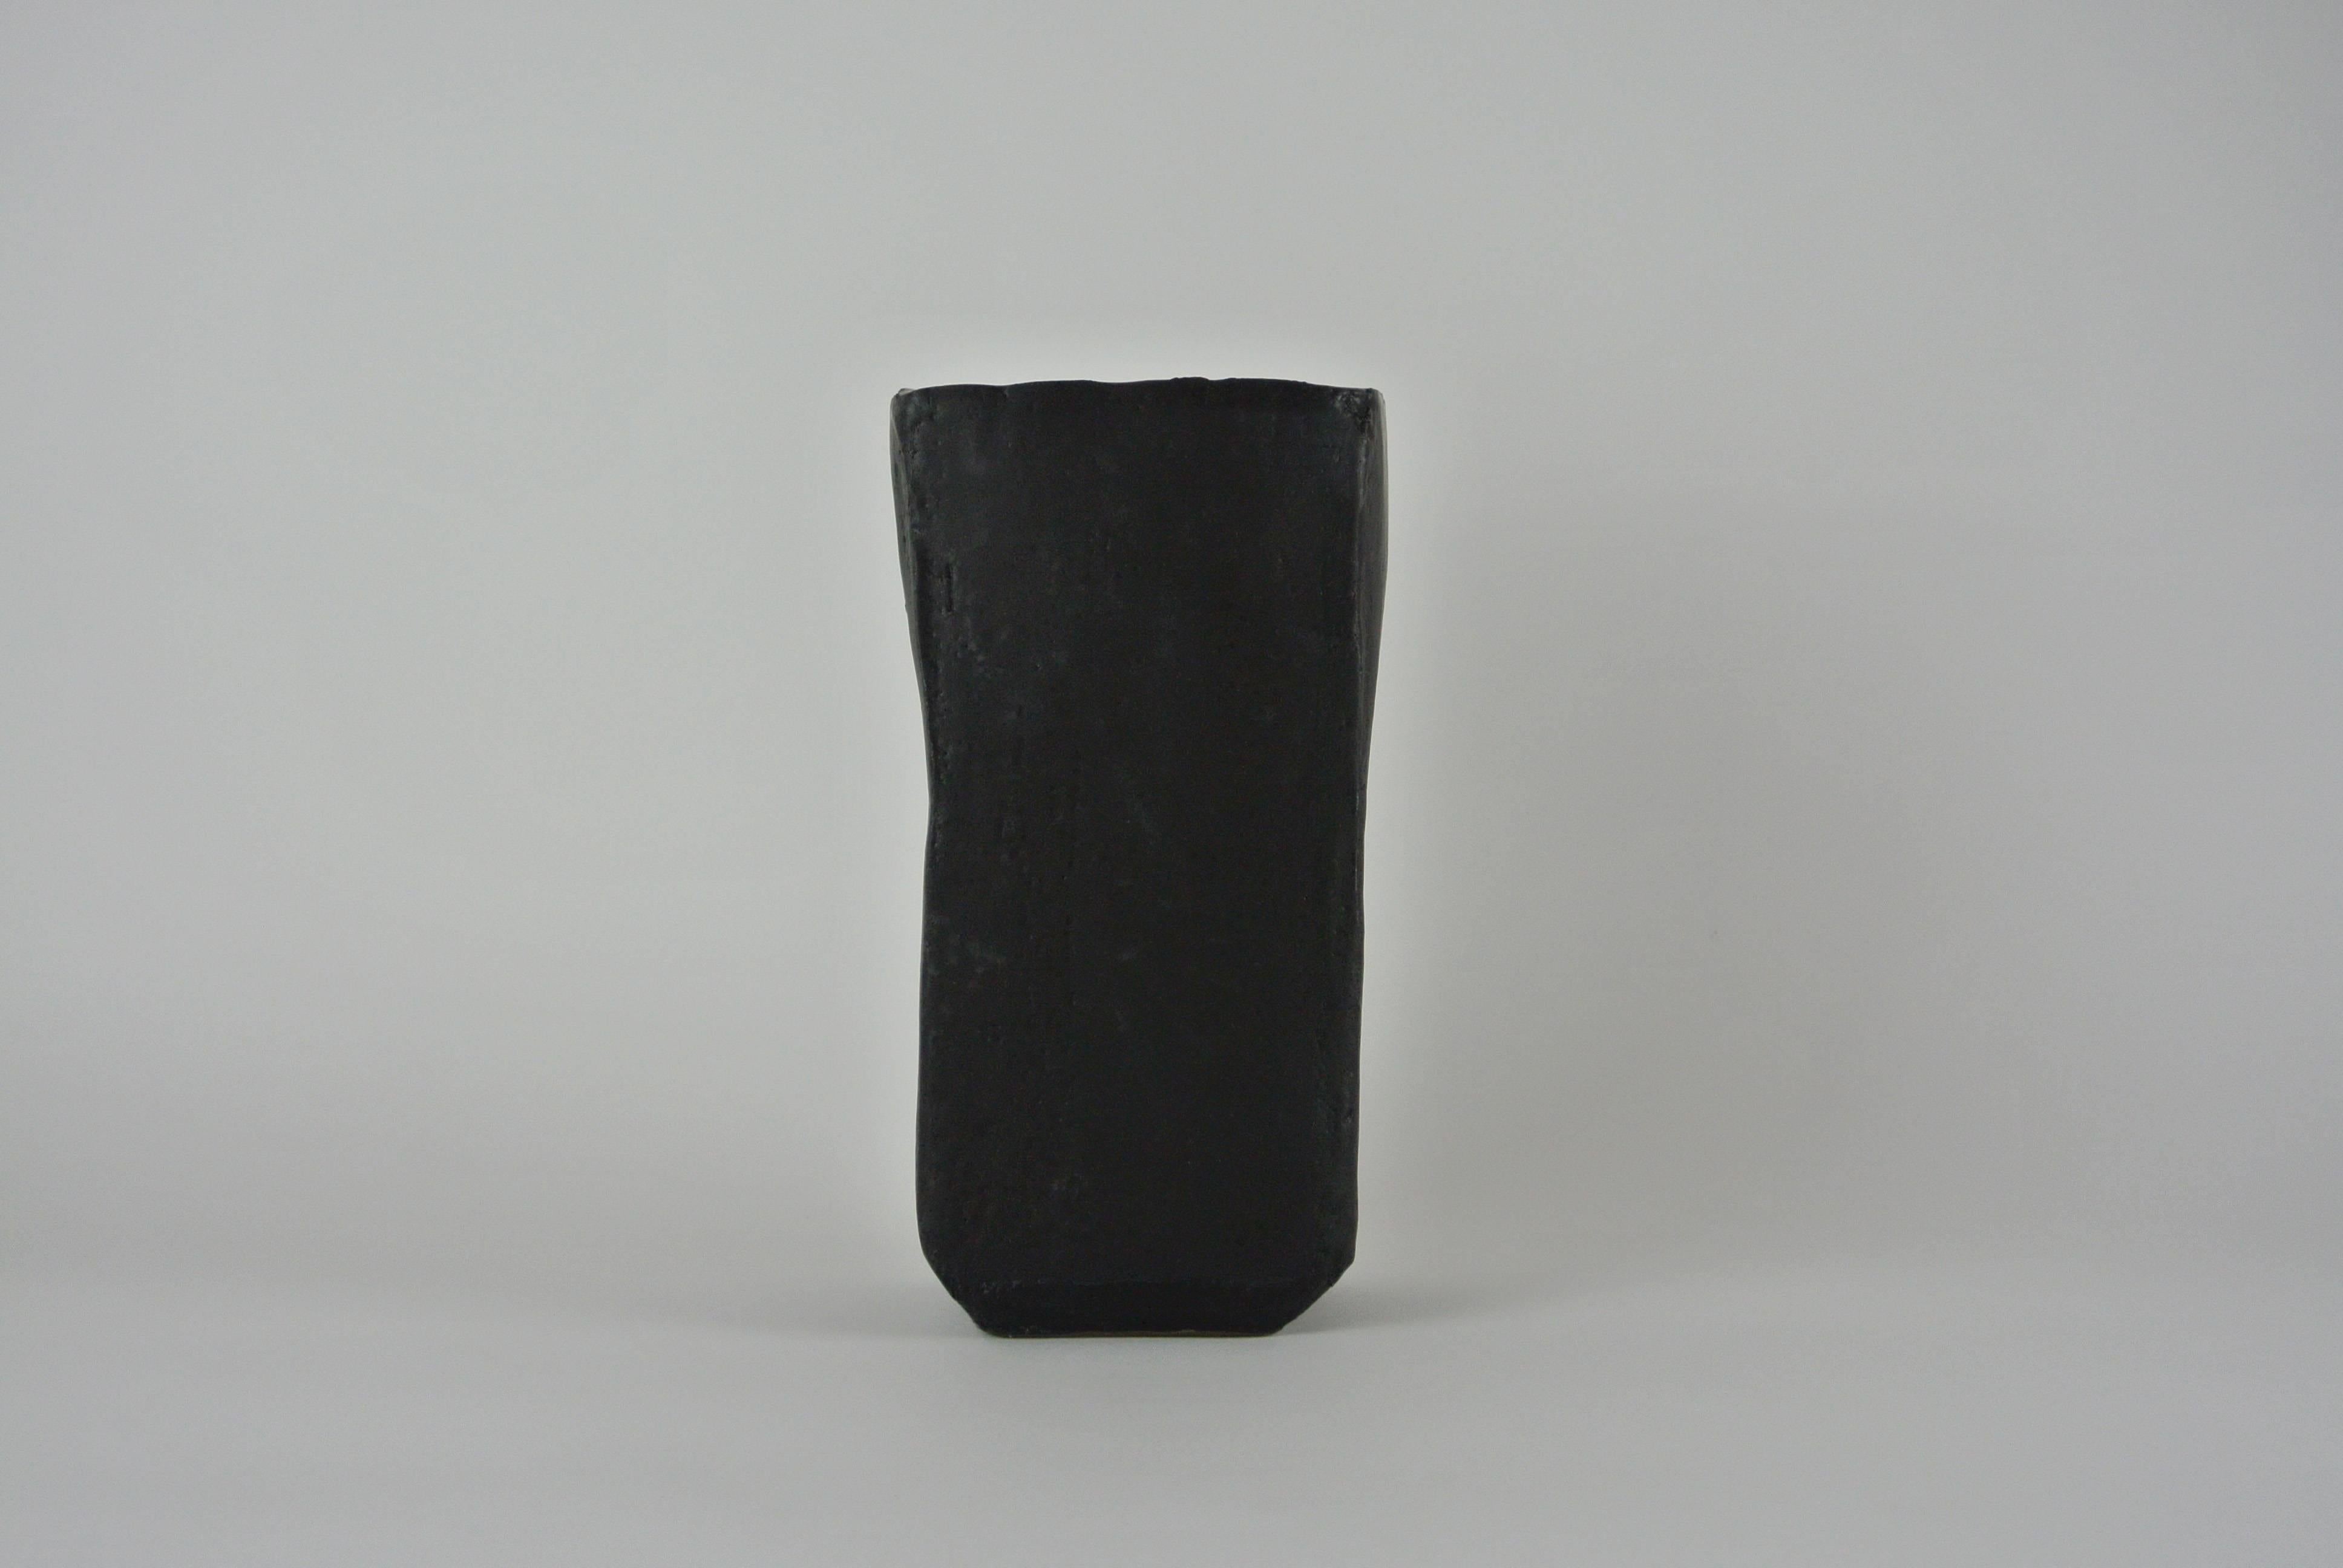 Large stoneware vase in smooth black stoneware with a black matte glaze. Slightly asymmetric shape. Functional and holds water.